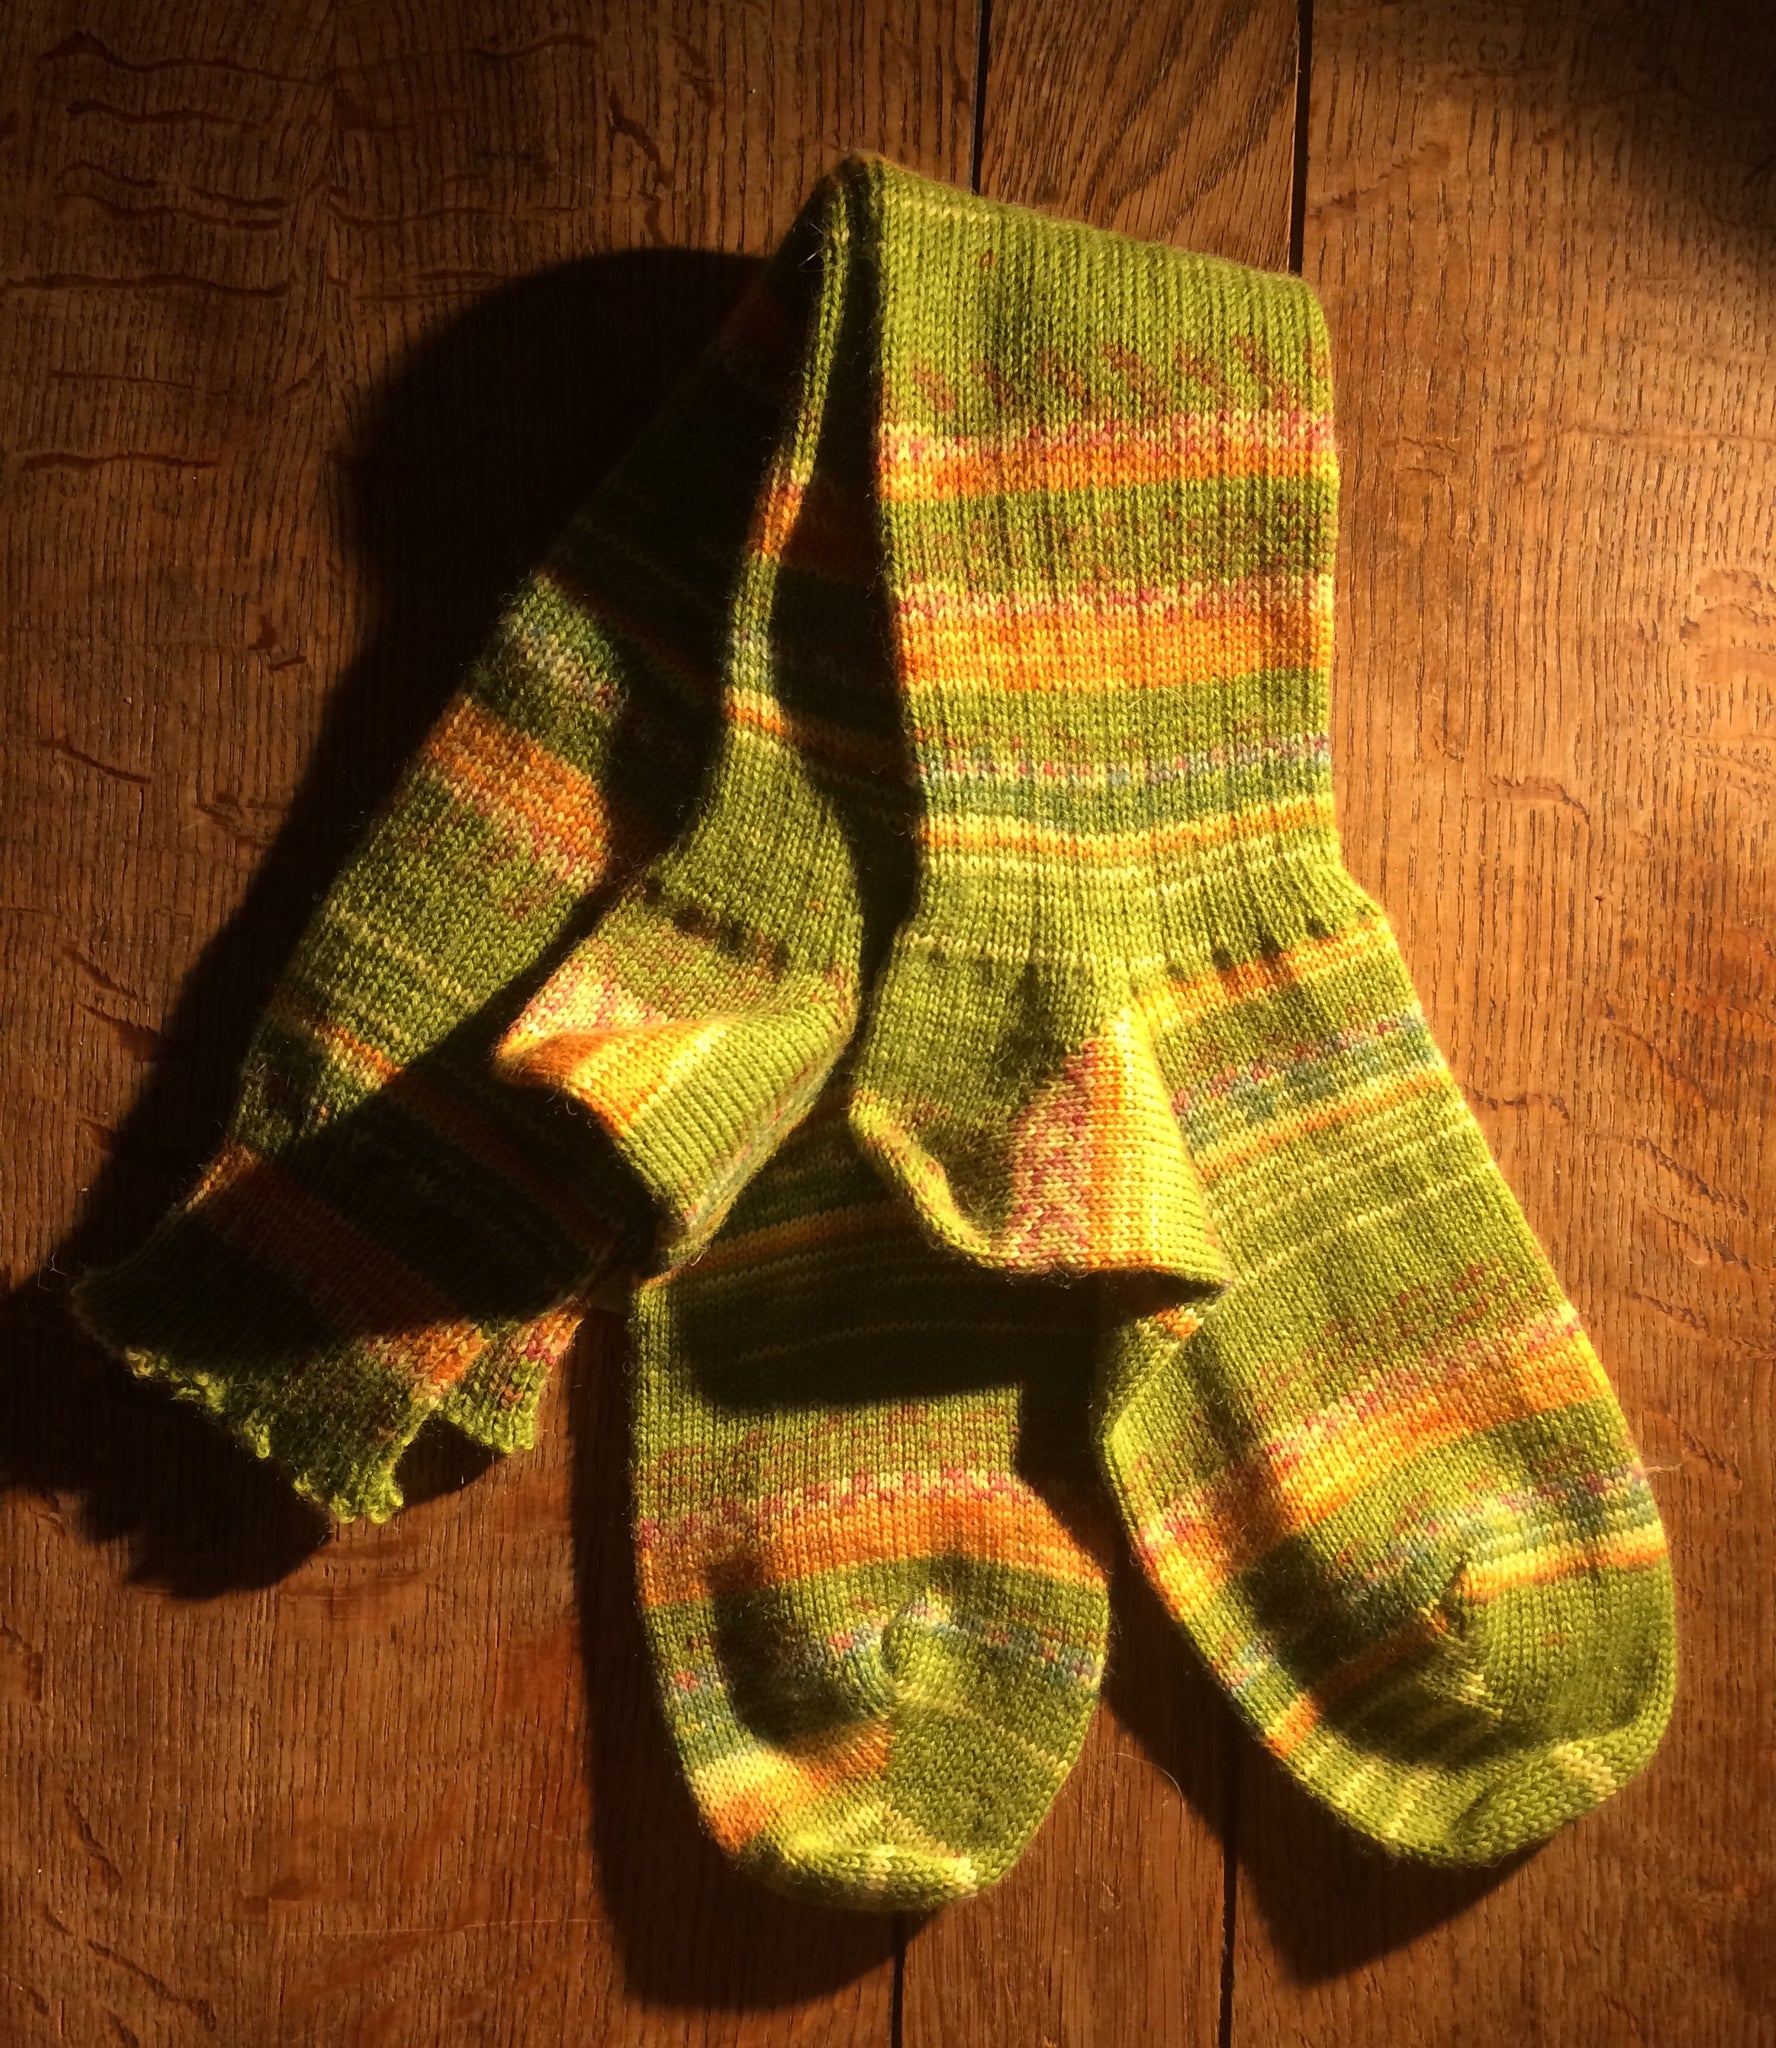 Lime green hand cranked wool blend everyday boot socks (size 8-10)